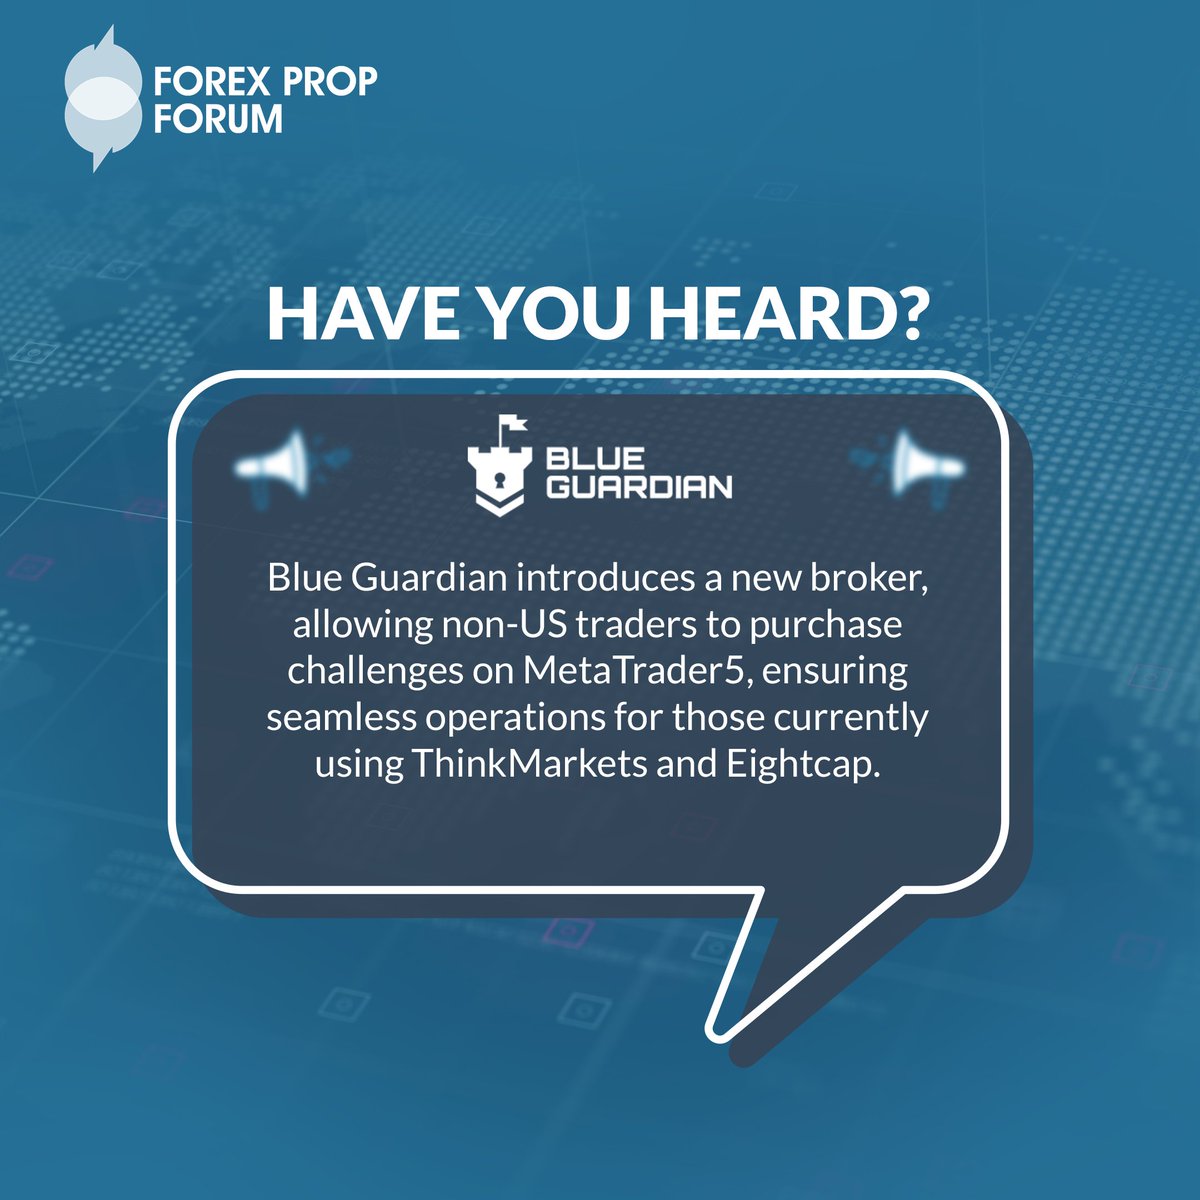 Have you heard? 😯
Blue Guardian introduces a new broker, allowing non-US traders to purchase challenges on MetaTrader5, ensuring seamless operations for those currently using ThinkMarkets and Eightcap.
#PropFirms #BlueGuardian #HaveYouHeard #ThinkMarkets #MT5